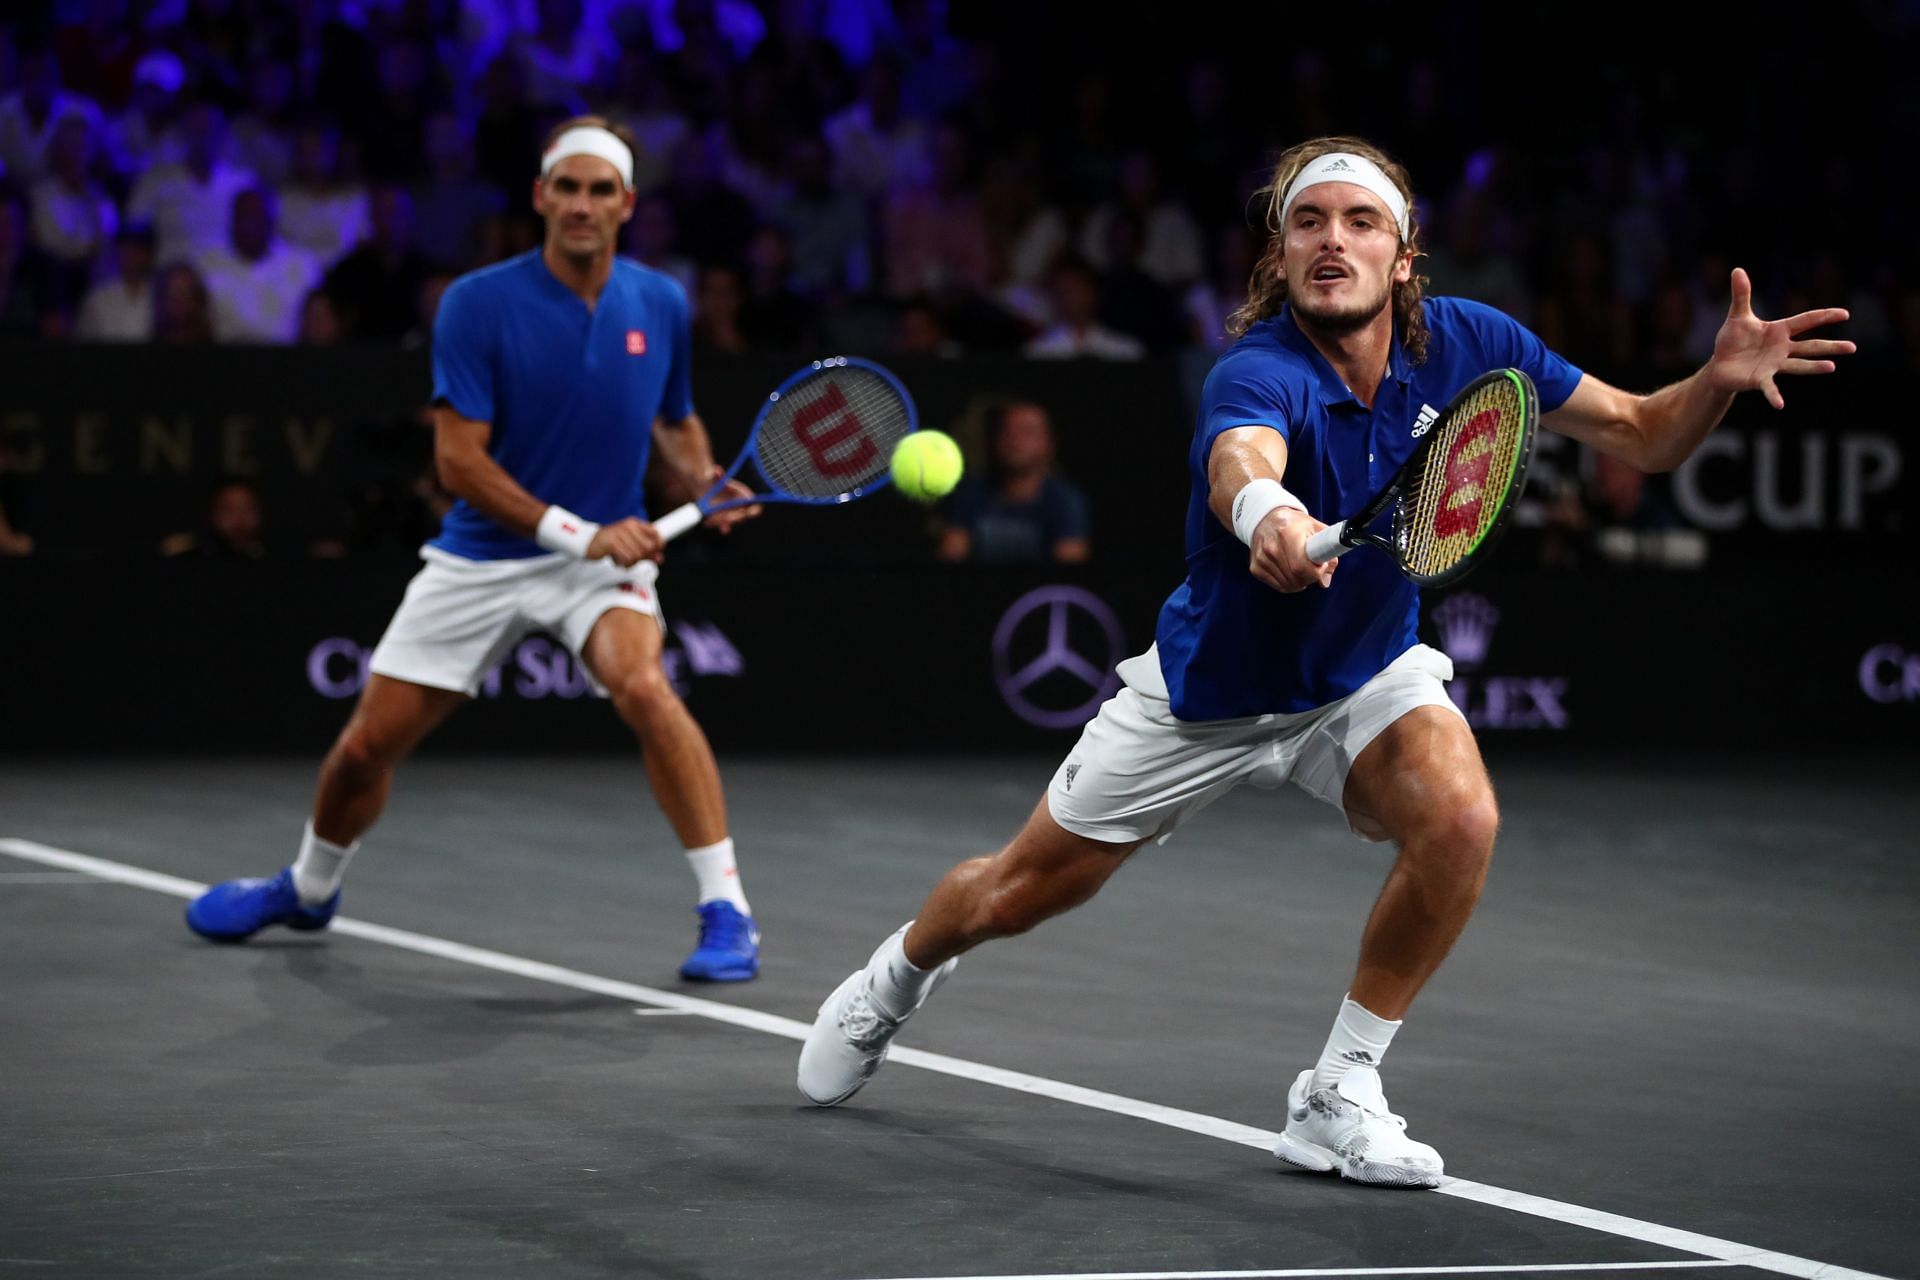  Federer (L) &amp; Tsitsipas in action at the Laver Cup 2019